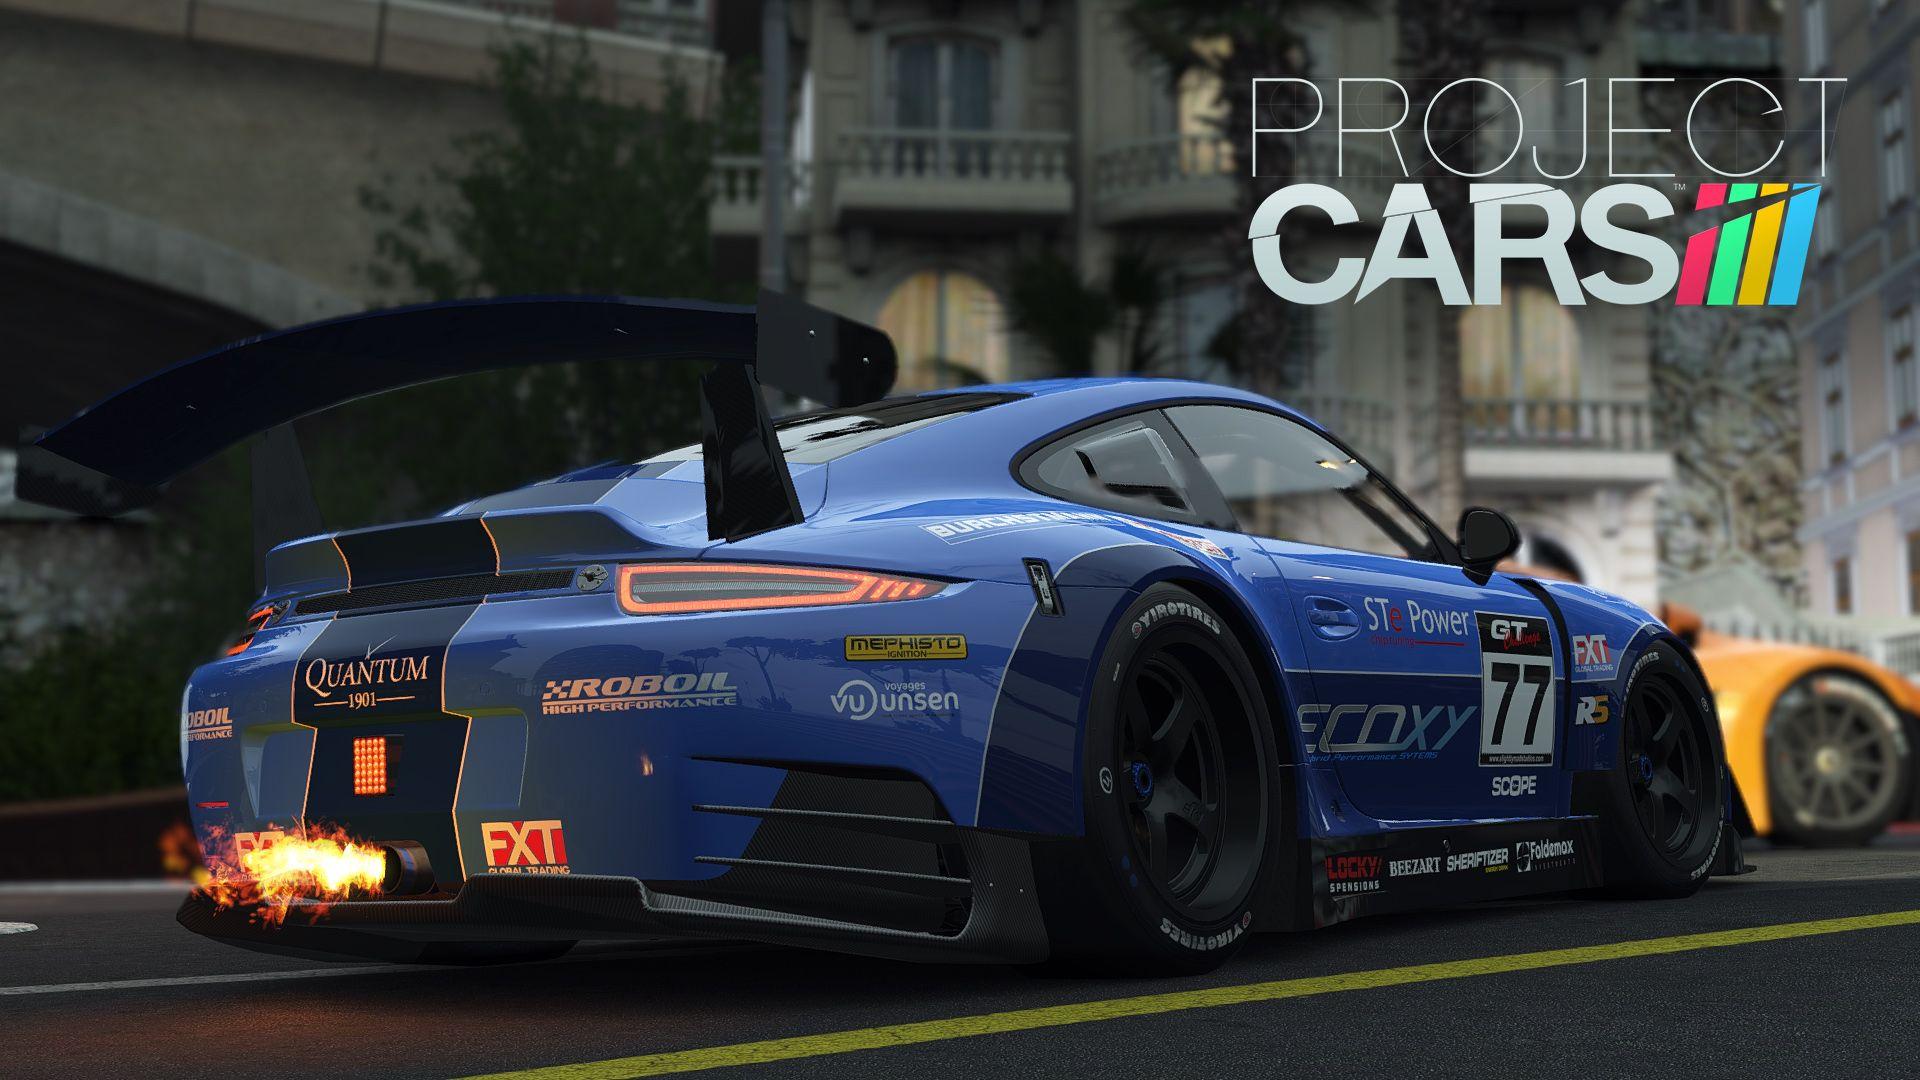 Awesome Project Cars Wallpaper 44773 1920x1080 px